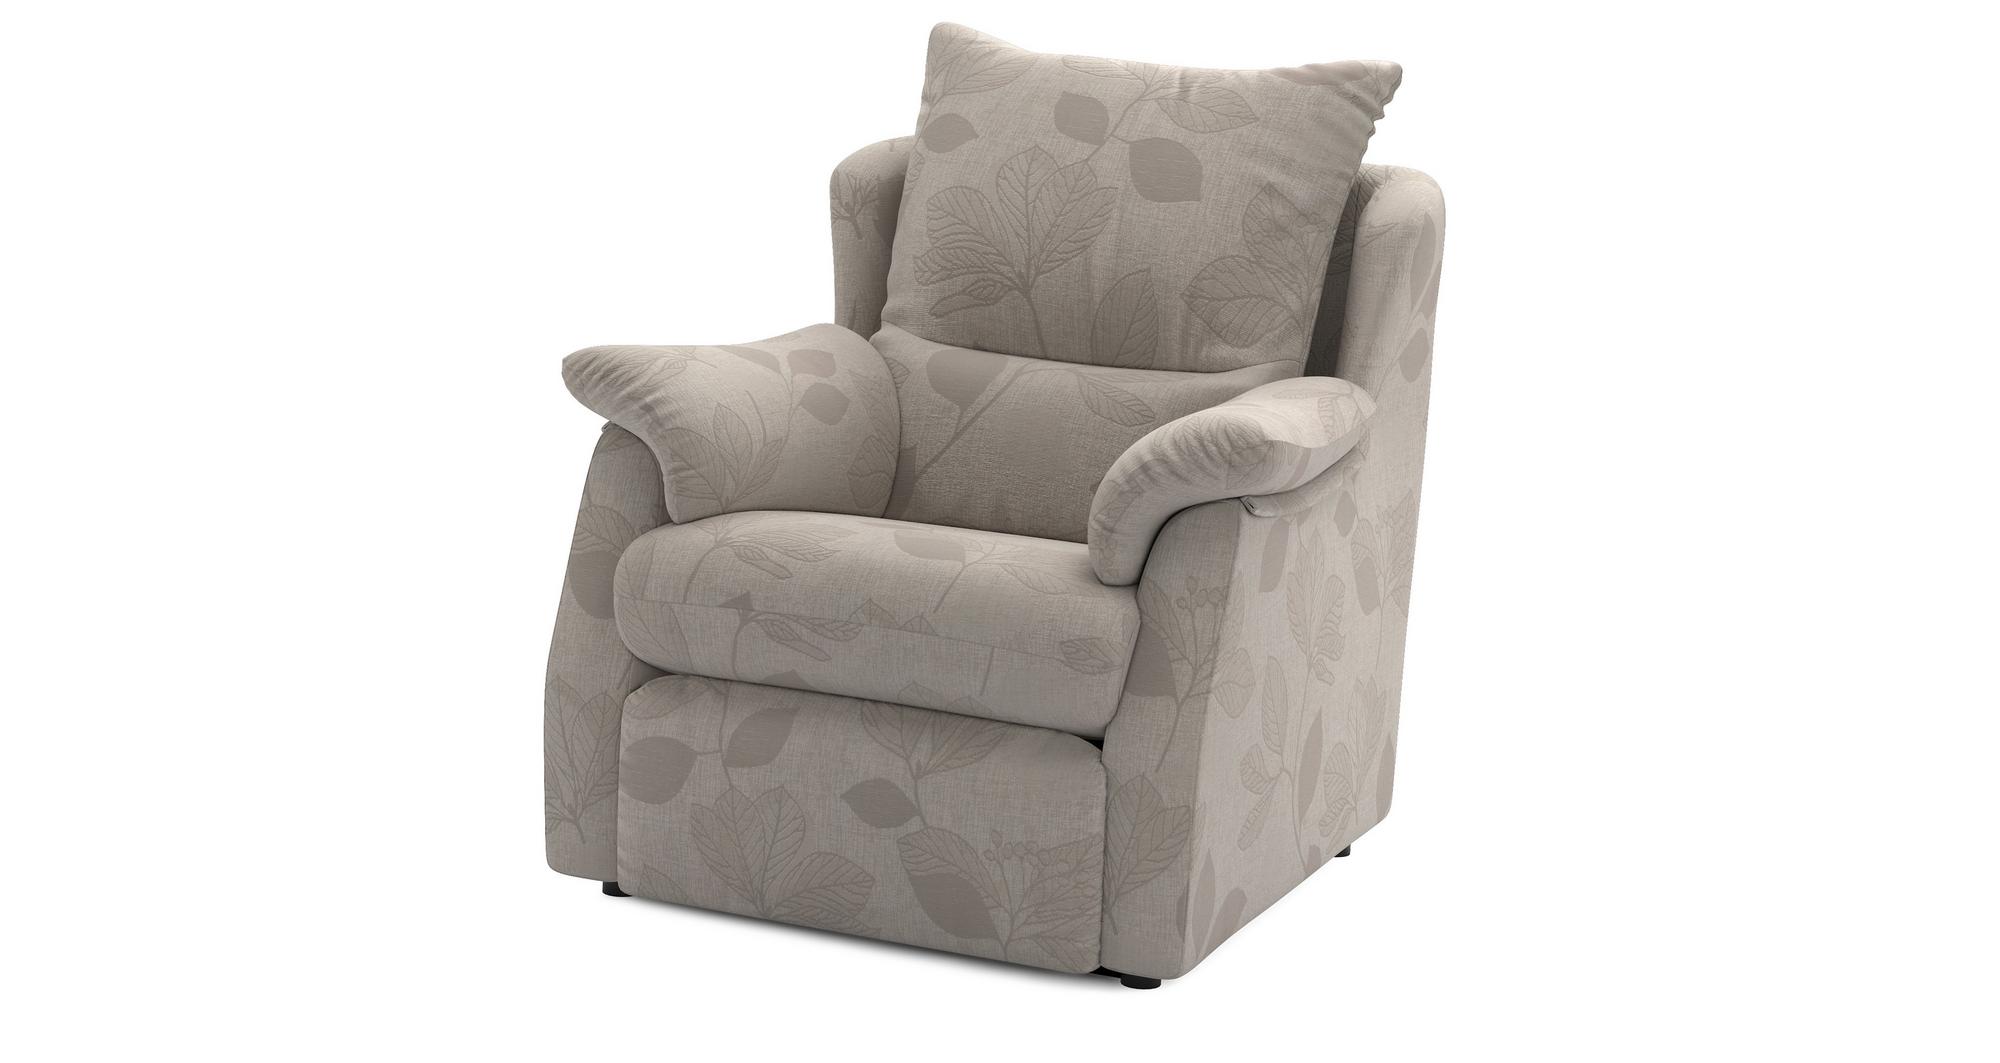 DFS Stow Camel Fabric 2 Seater Sofa &amp; Manual Recliner Chair